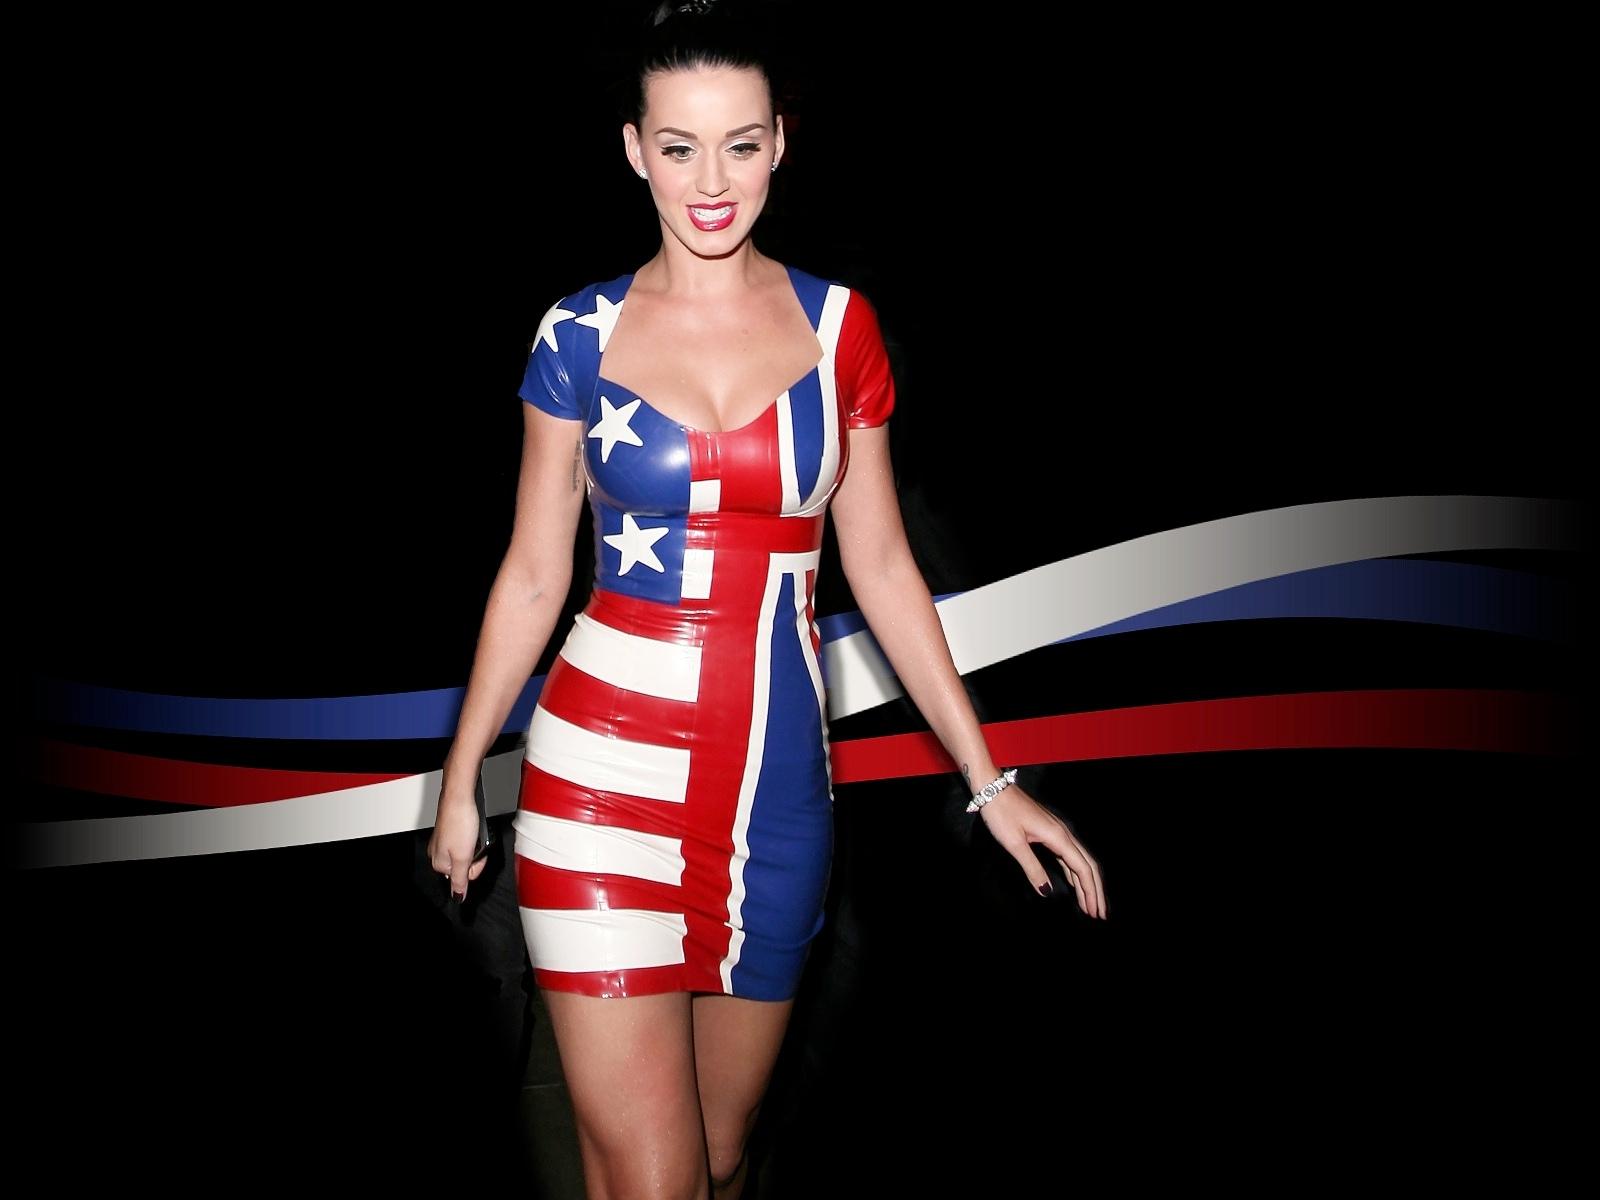 Katy Perry Dress Usa Flag Wallpaper. Download wallpaper page